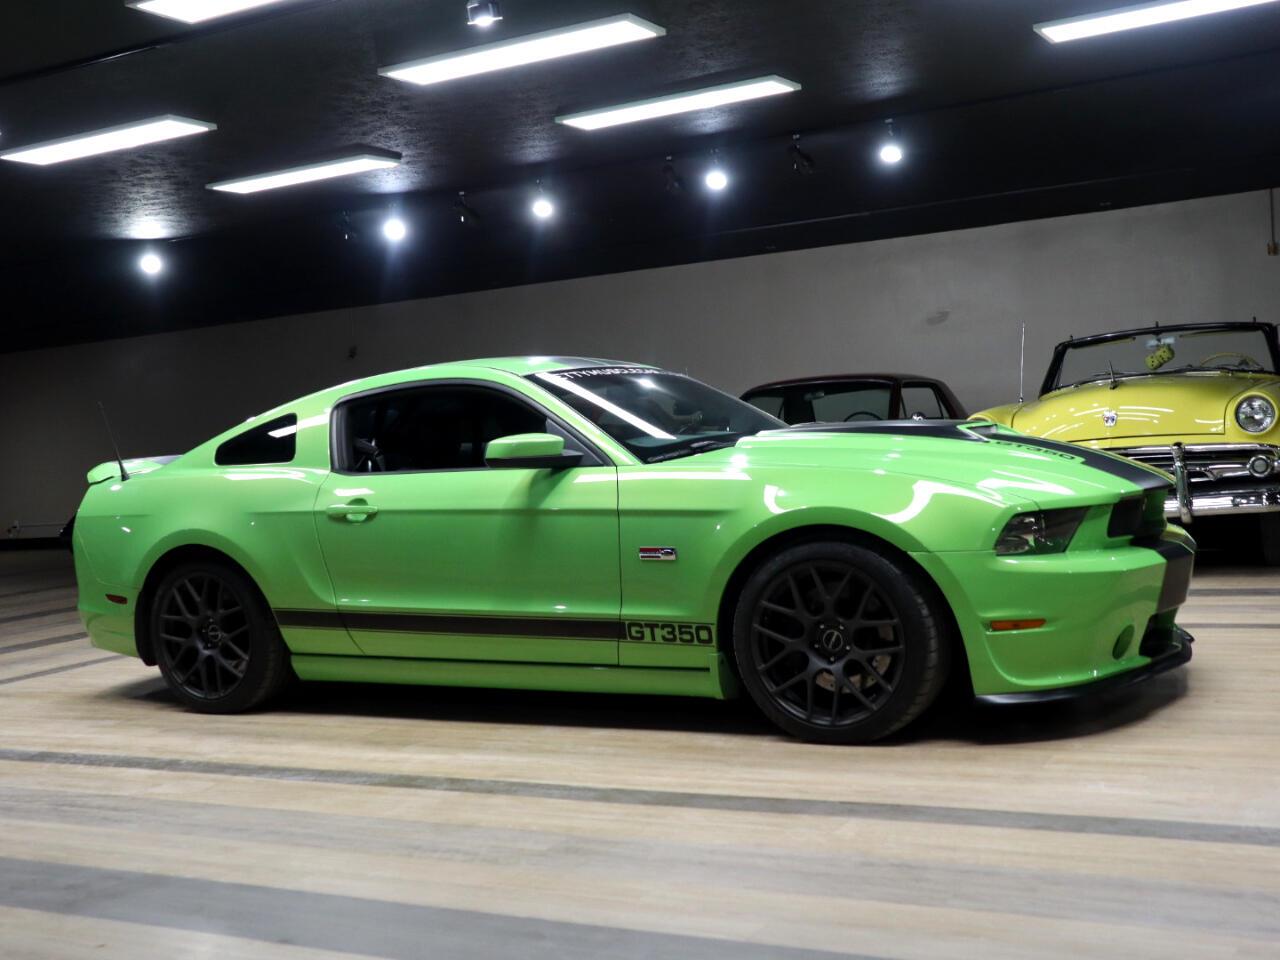 For Sale: 2013 Ford Mustang in Greenfield, Indiana for sale in Greenfield, IN